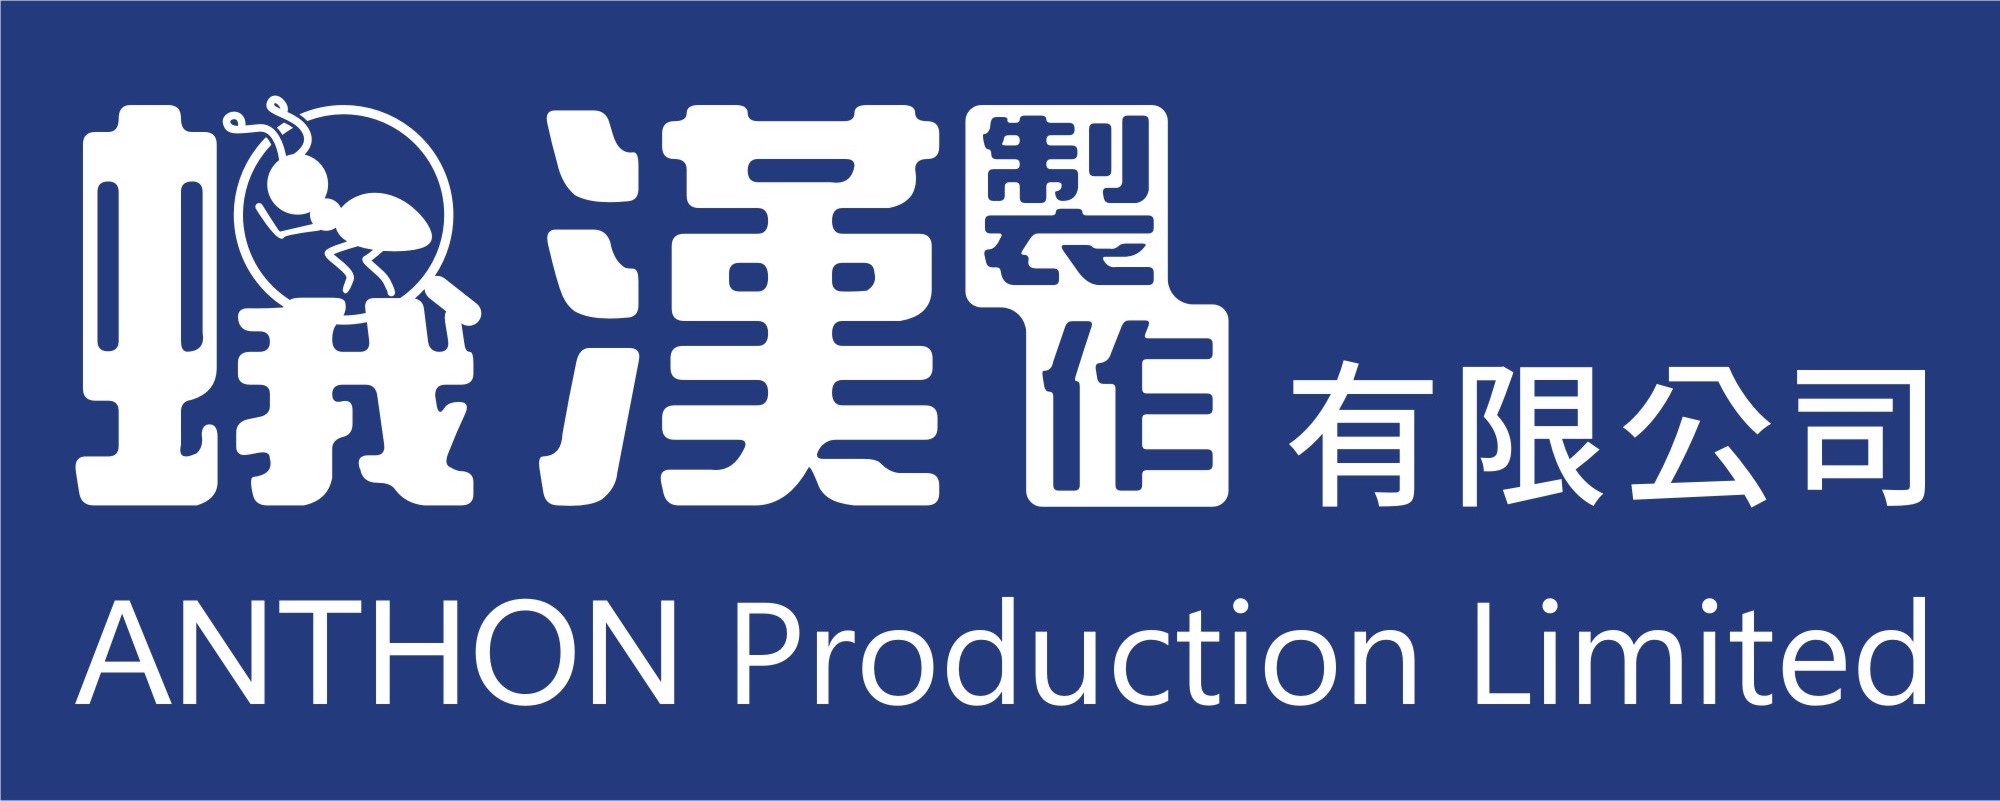 Anthon Production Limited